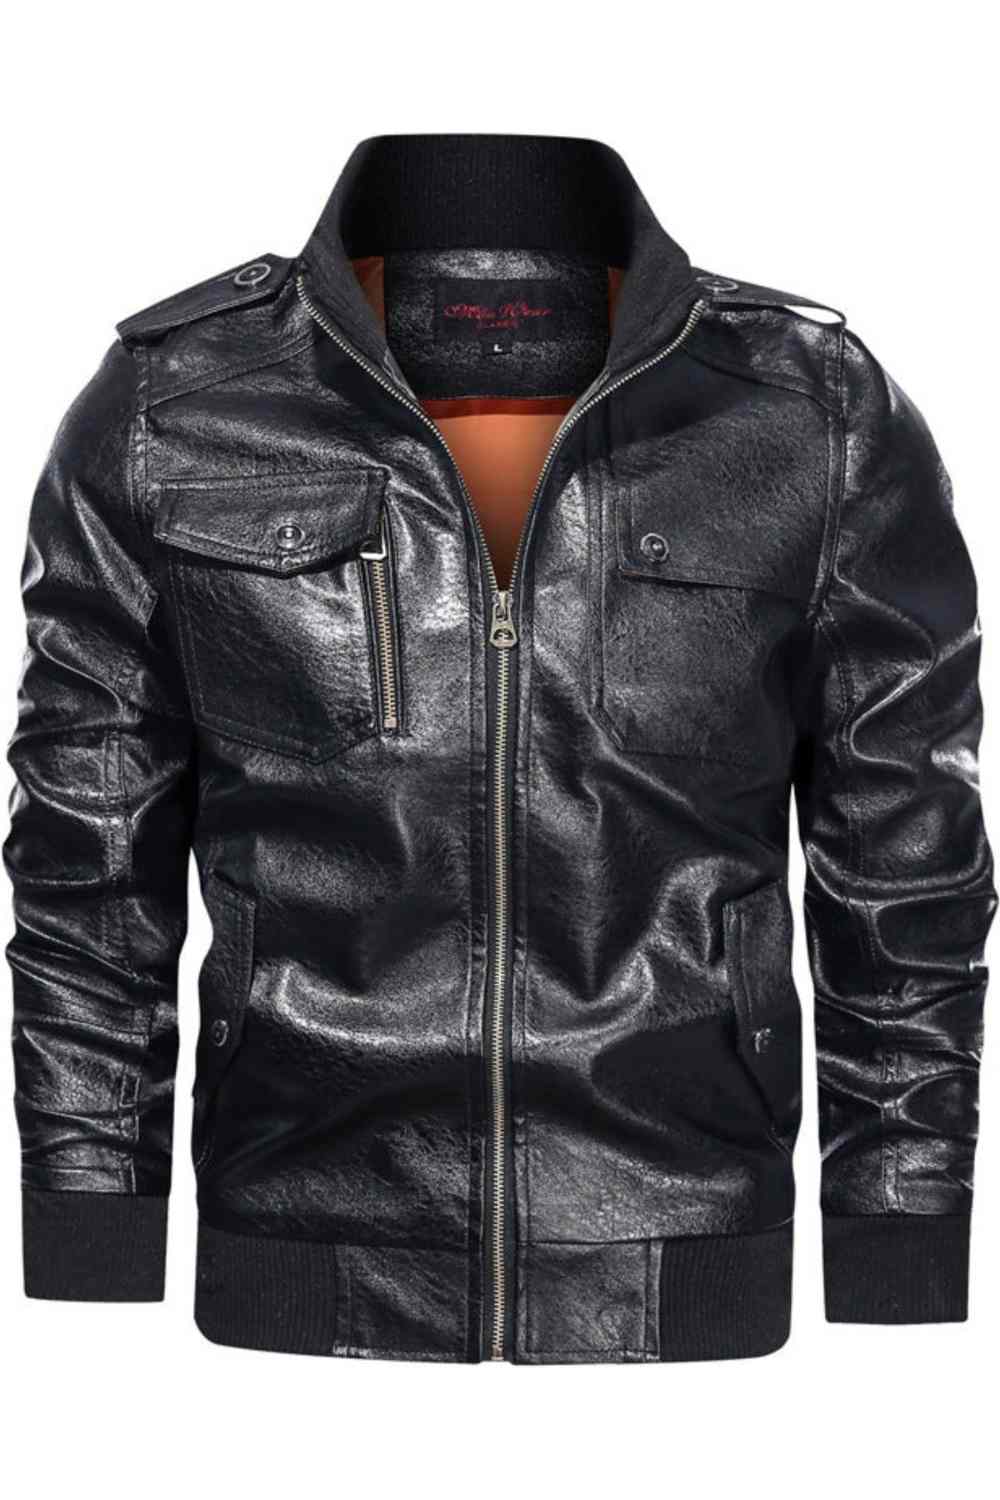 Men's Black Leather Jacket - Bold and Elegant Style for Adults - A.A.Y FASHION